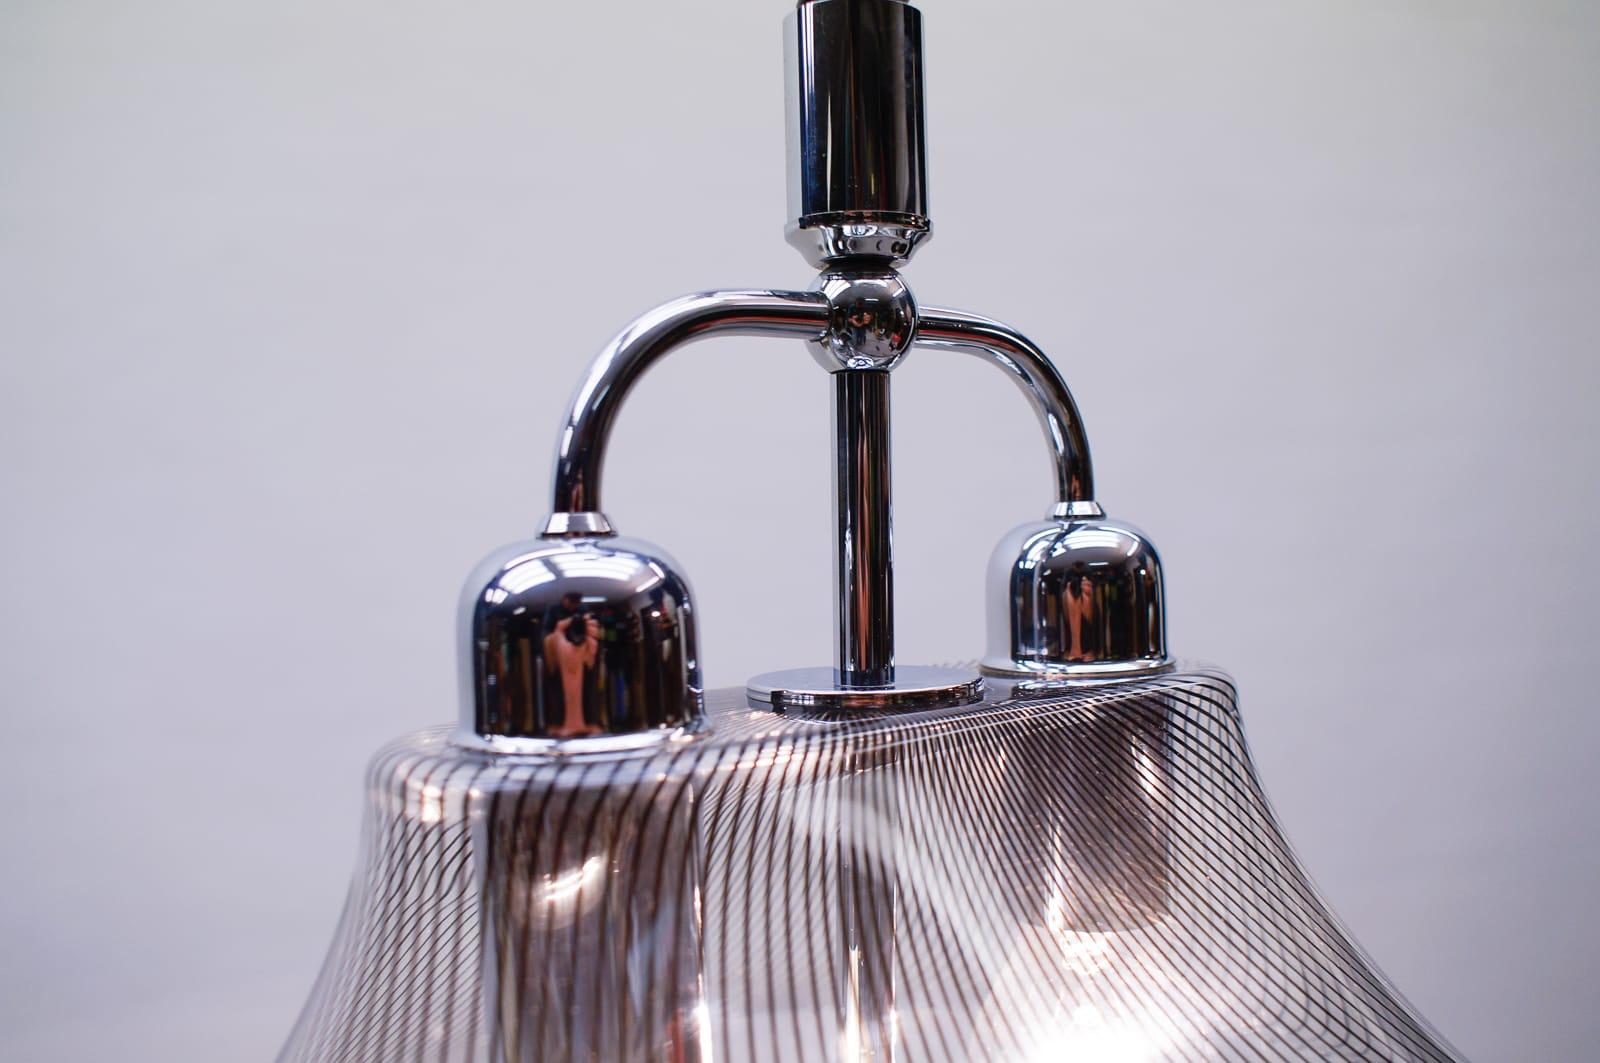 Very Elegant Striped Acrylic Hanging Lamp by Edel-Acryl, 1970s For Sale 3